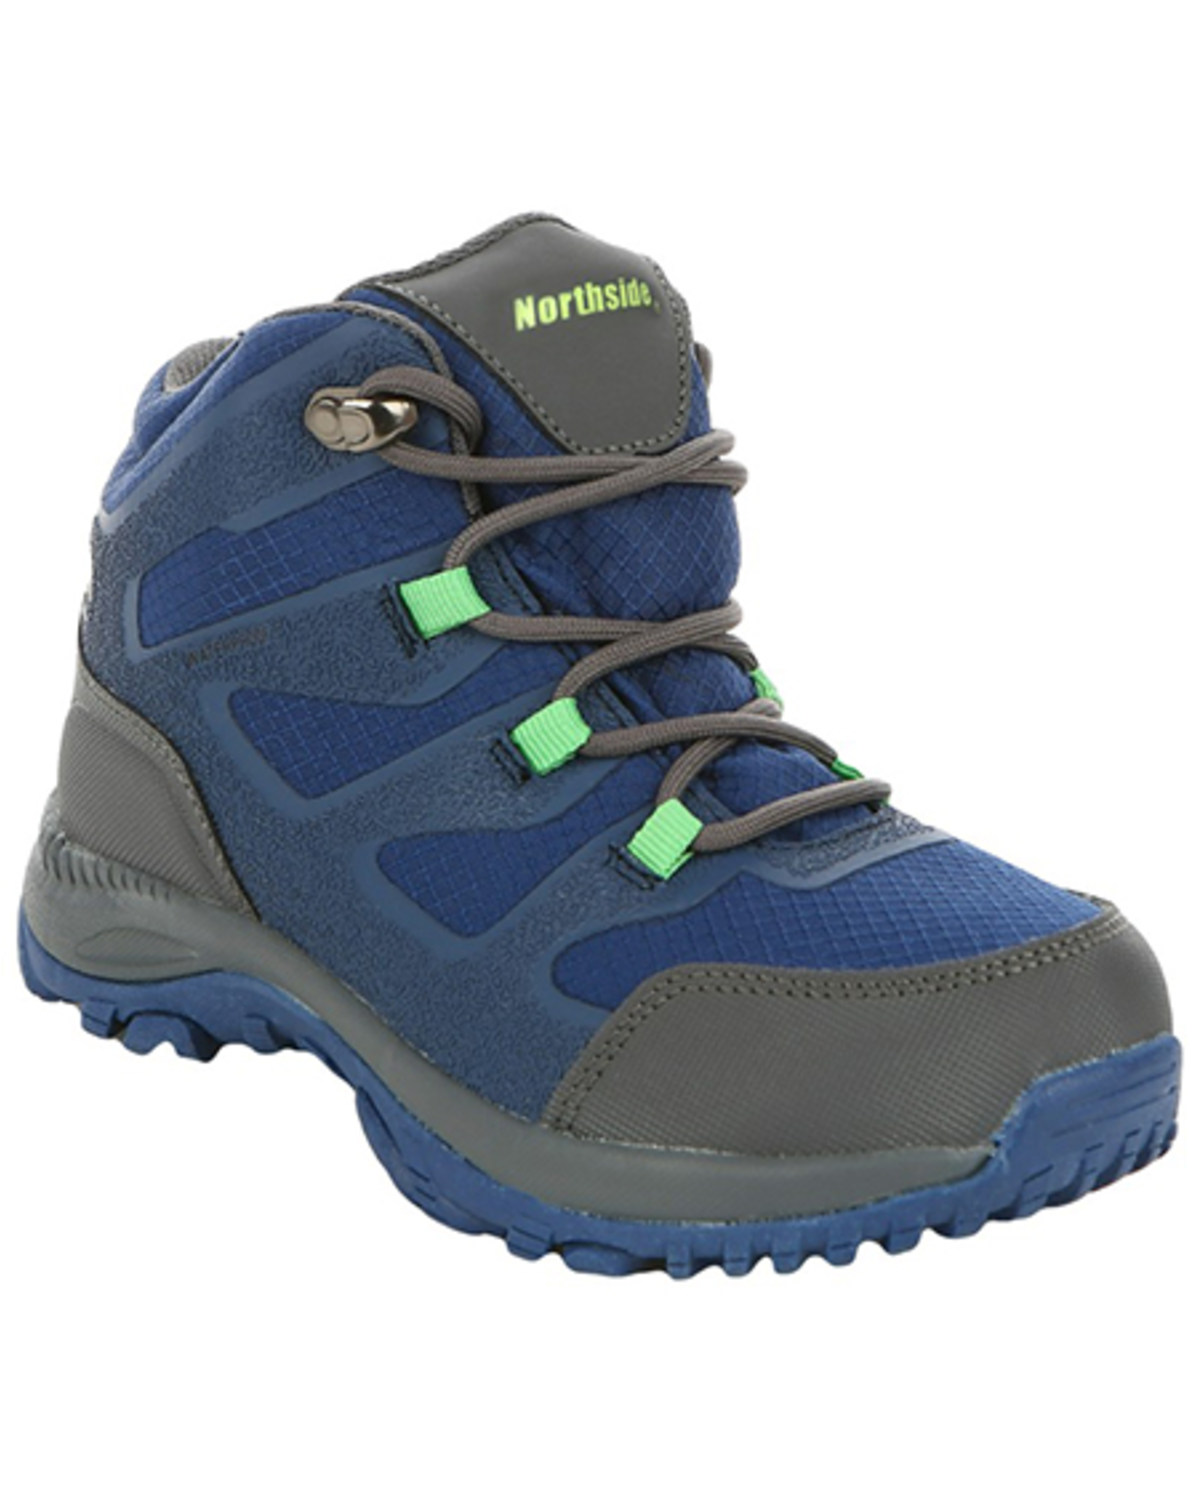 Northside Boys' Hargrove Mid Lace-Up Waterproof Hiking Boots